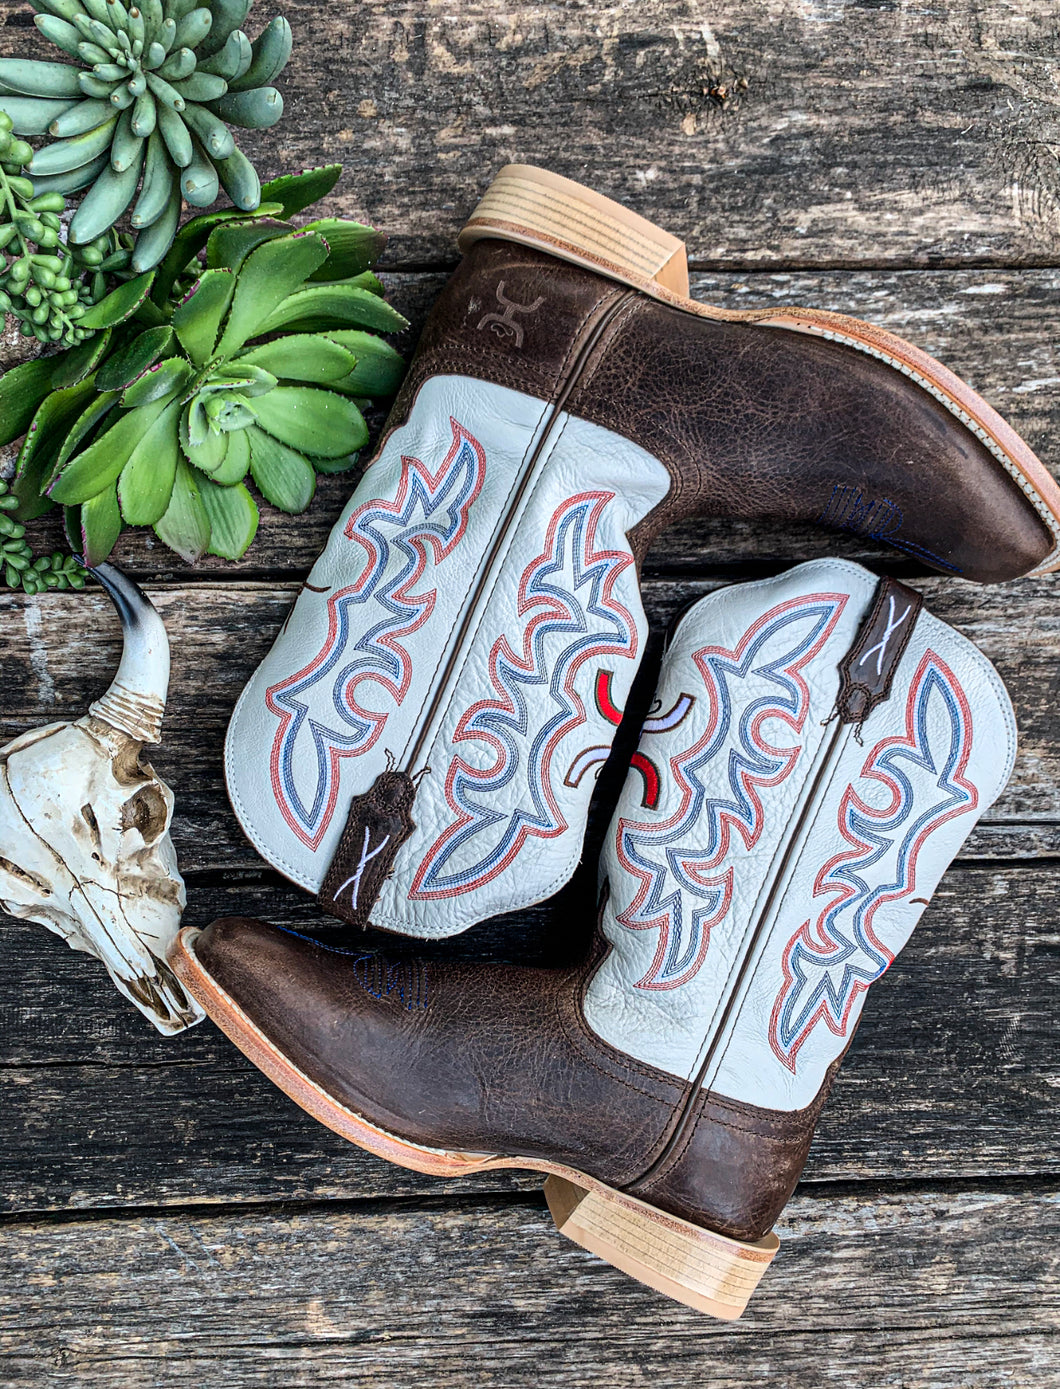 Twisted X Hooey Patriotic Boots